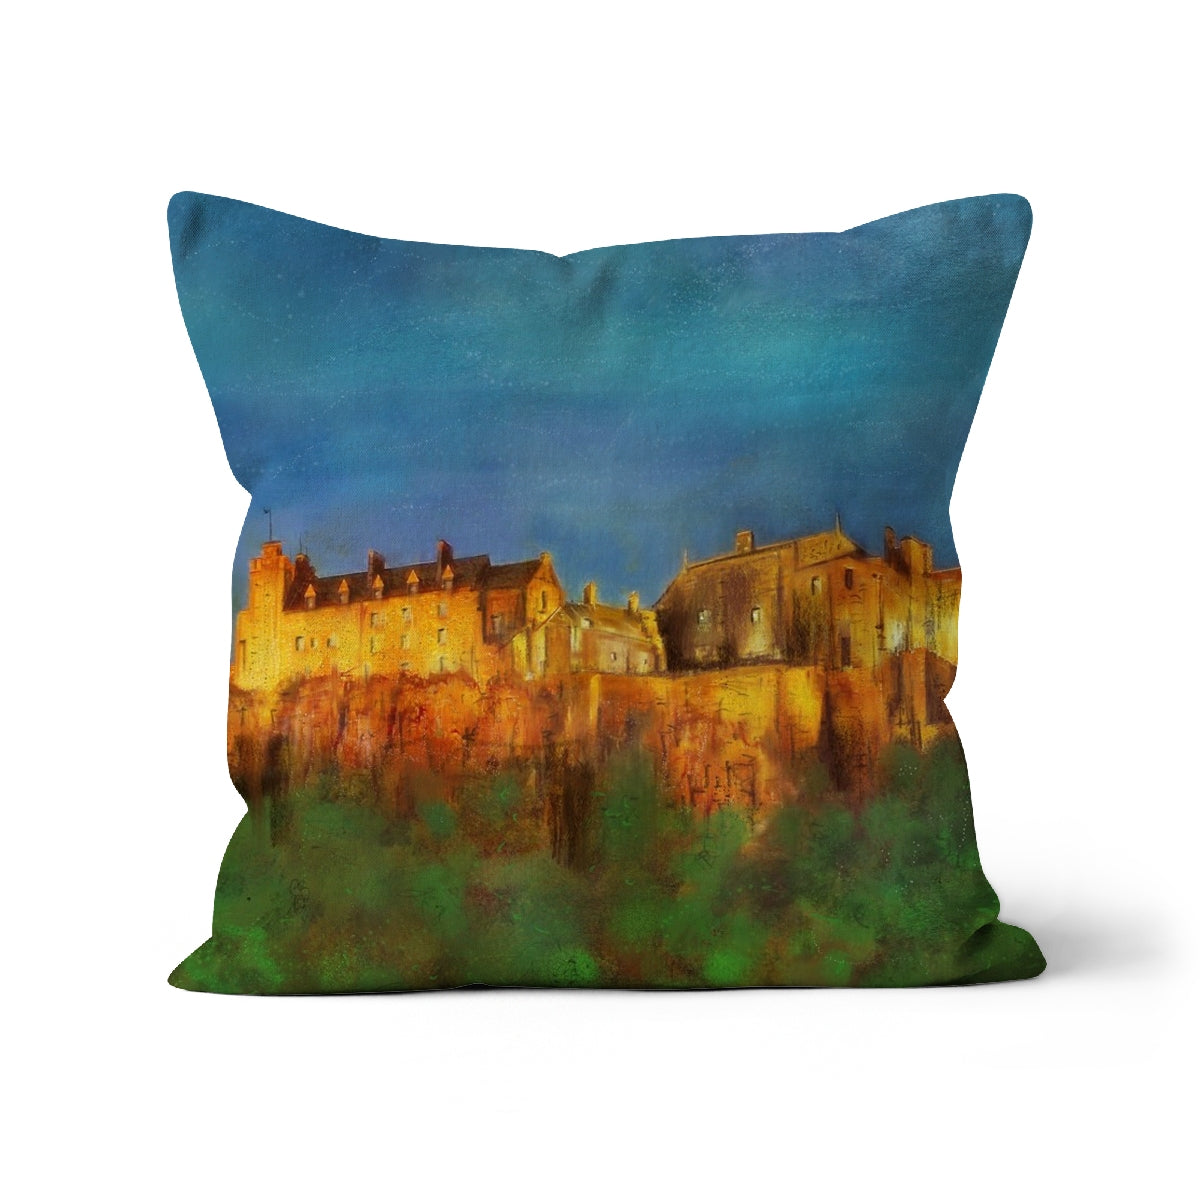 Stirling Castle Art Gifts Cushion-Cushions-Historic & Iconic Scotland Art Gallery-Faux Suede-12"x12"-Paintings, Prints, Homeware, Art Gifts From Scotland By Scottish Artist Kevin Hunter